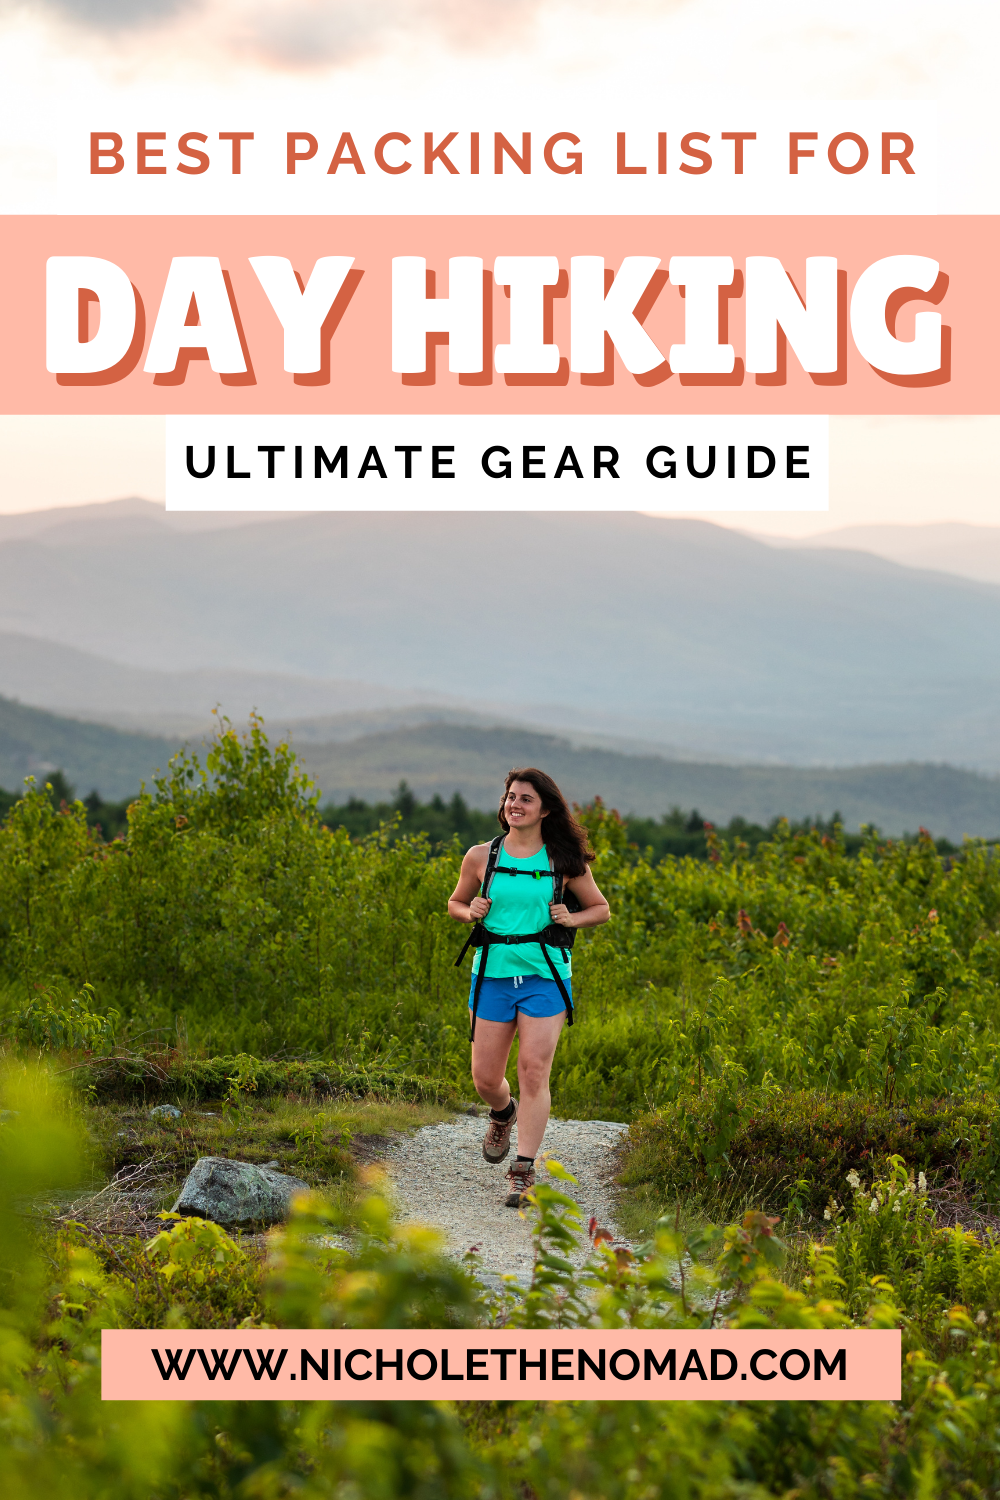 15 Hiking Must Haves: Packing List for a Day Hike ⋆ The World As I See It